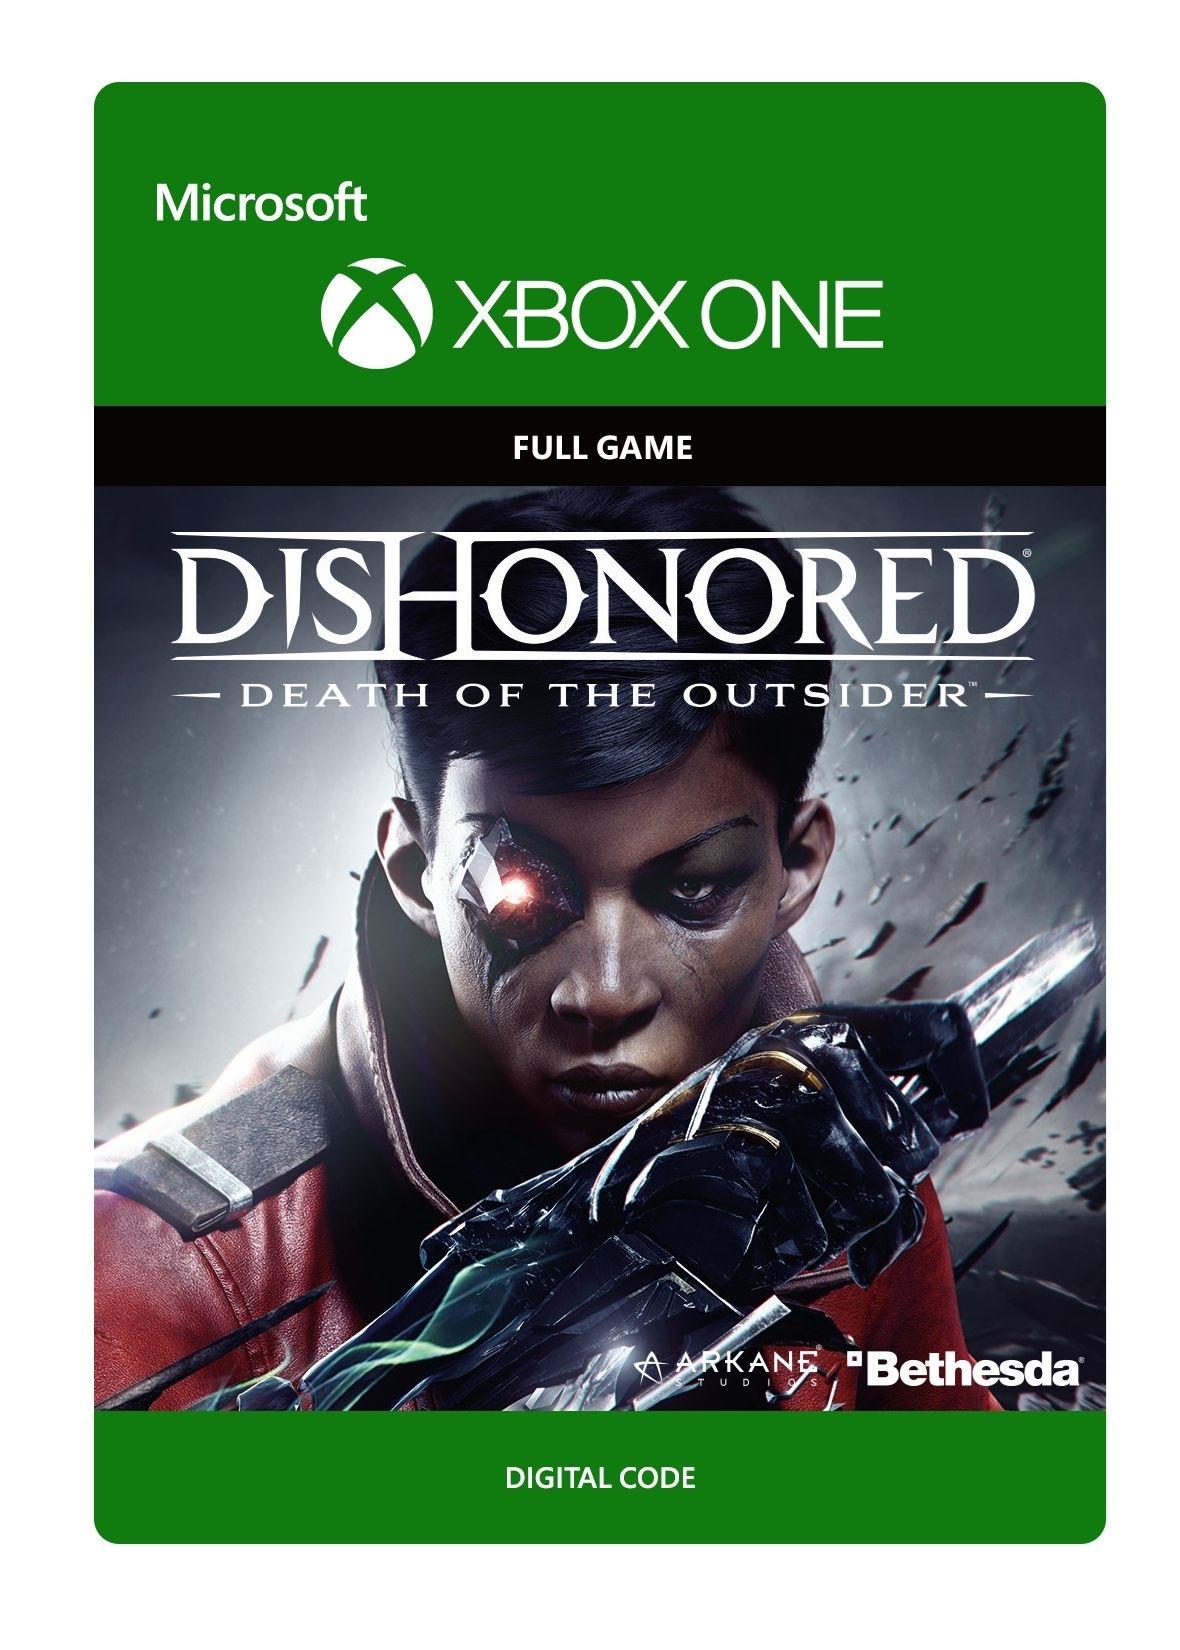 Dishonored: Death of the Outsider - Xbox One - Full Game | G3Q-00362 (a6cd300c-6599-4e4d-98d5-099f66d7ac78)